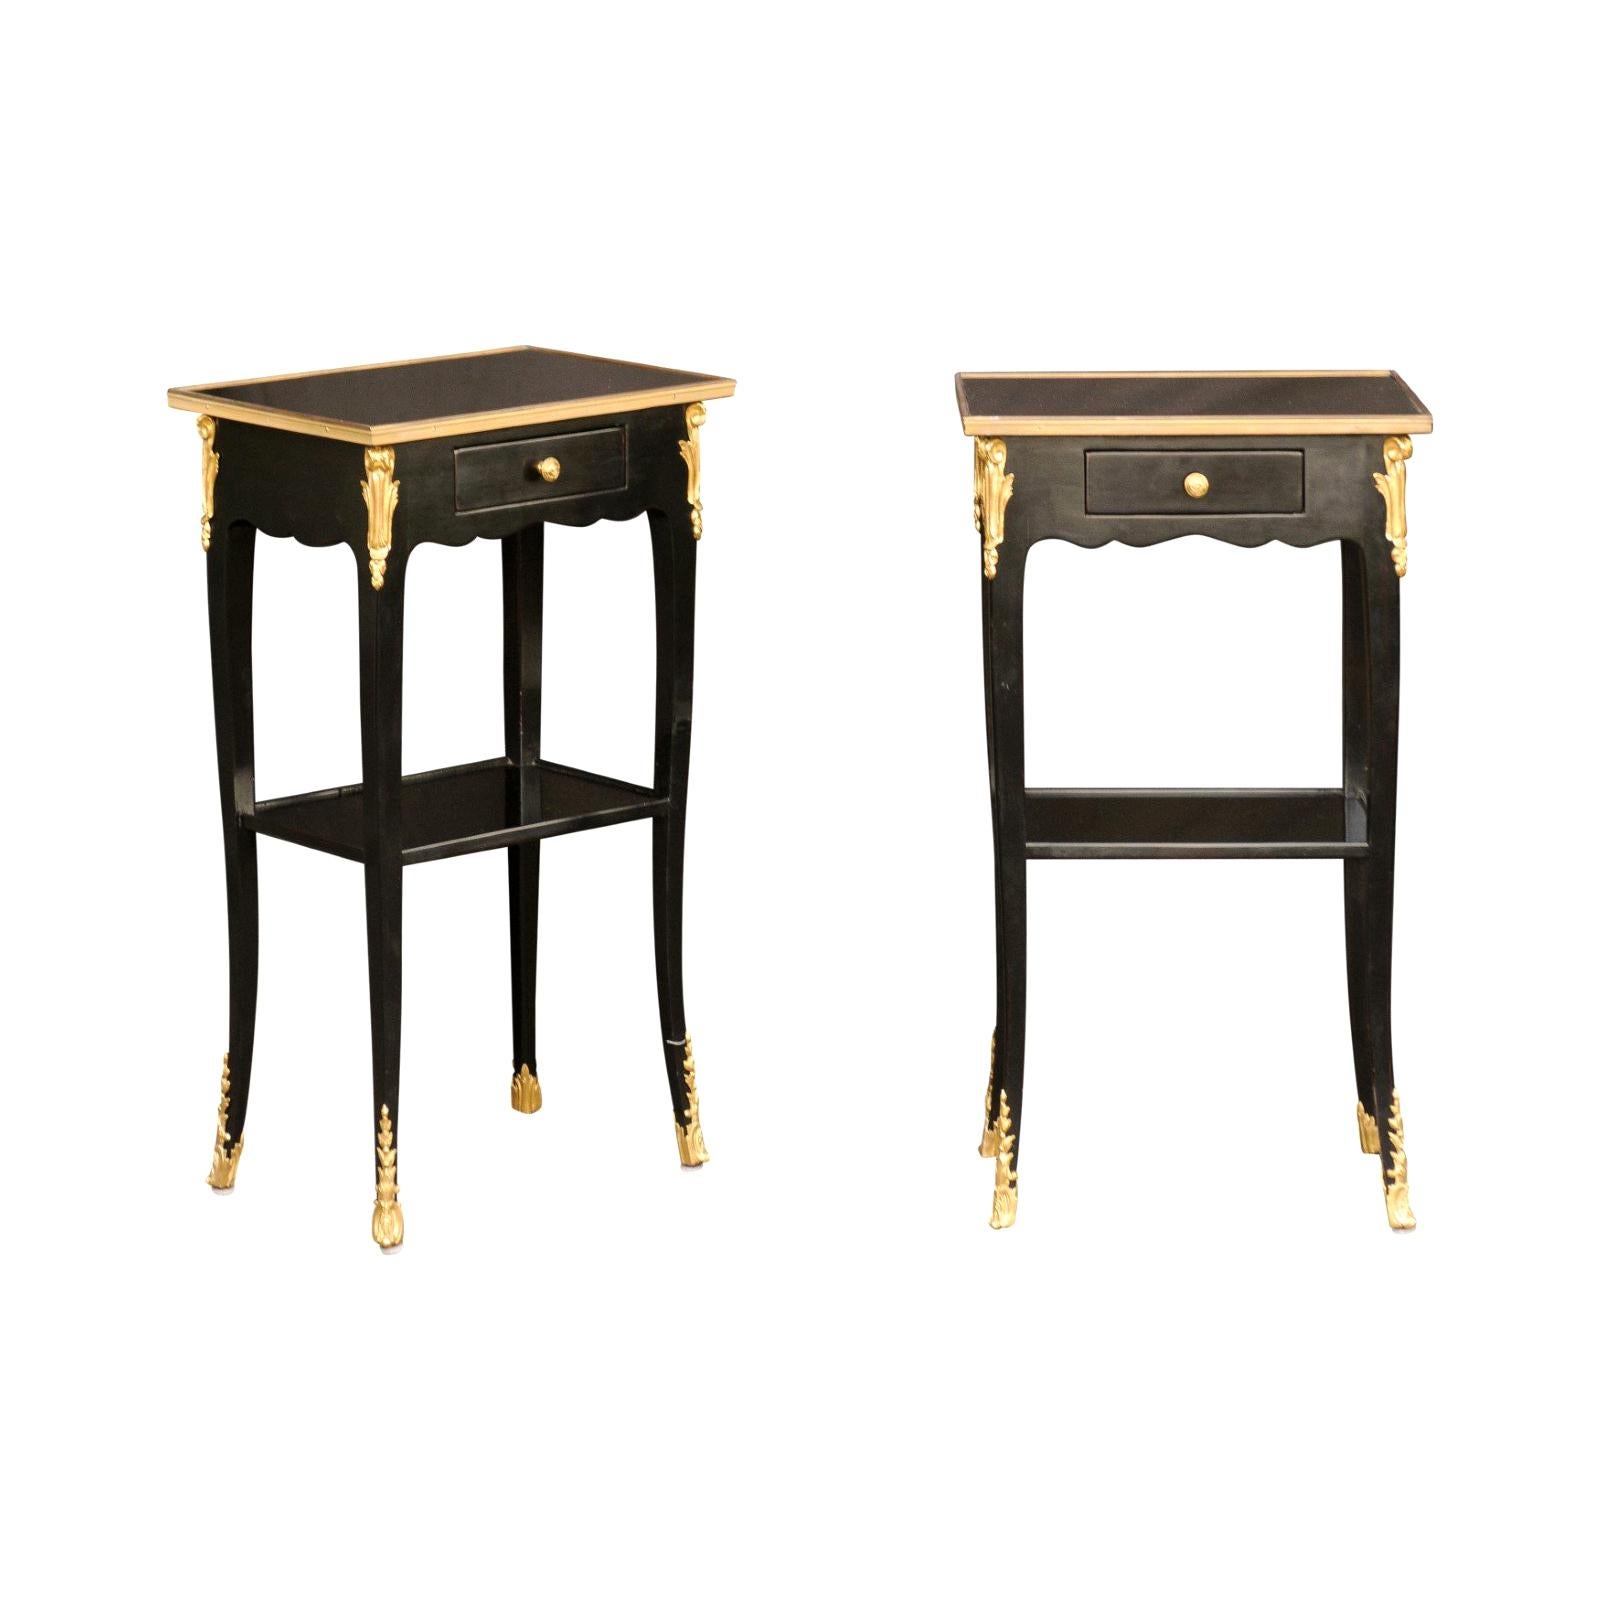 Pair of French Midcentury Ebonized Tables with Ormolu Mounts, Drawer and Shelf